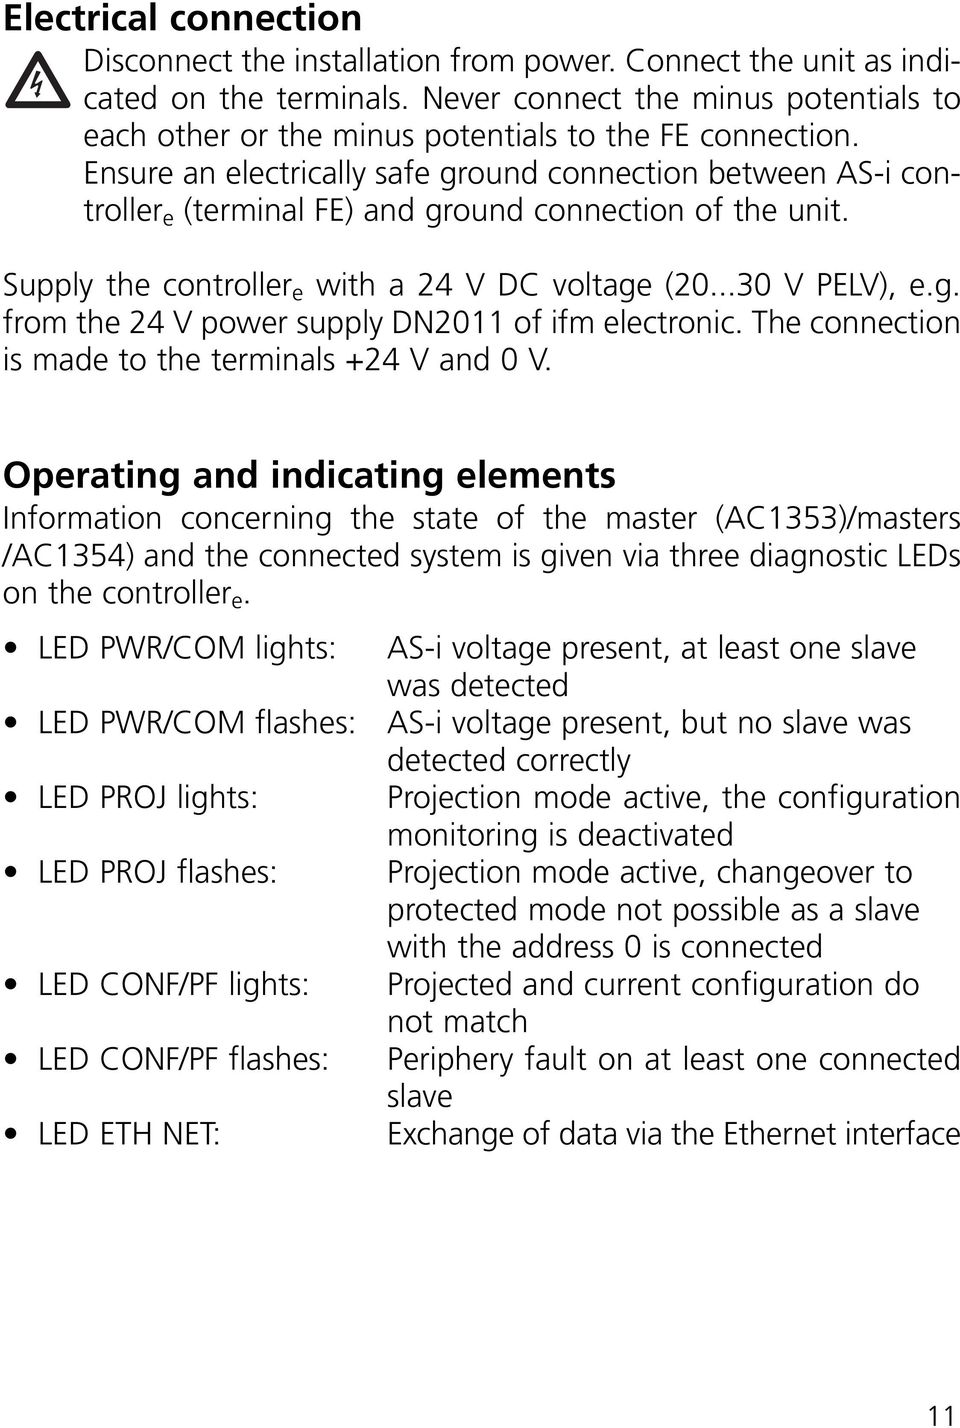 Ensure an electrically safe ground connection between AS-i controller e (terminal FE) and ground connection of the unit. Supply the controller e with a 24 V C voltage (20...30 V PELV), e.g. from the 24 V power supply N2011 of ifm electronic.